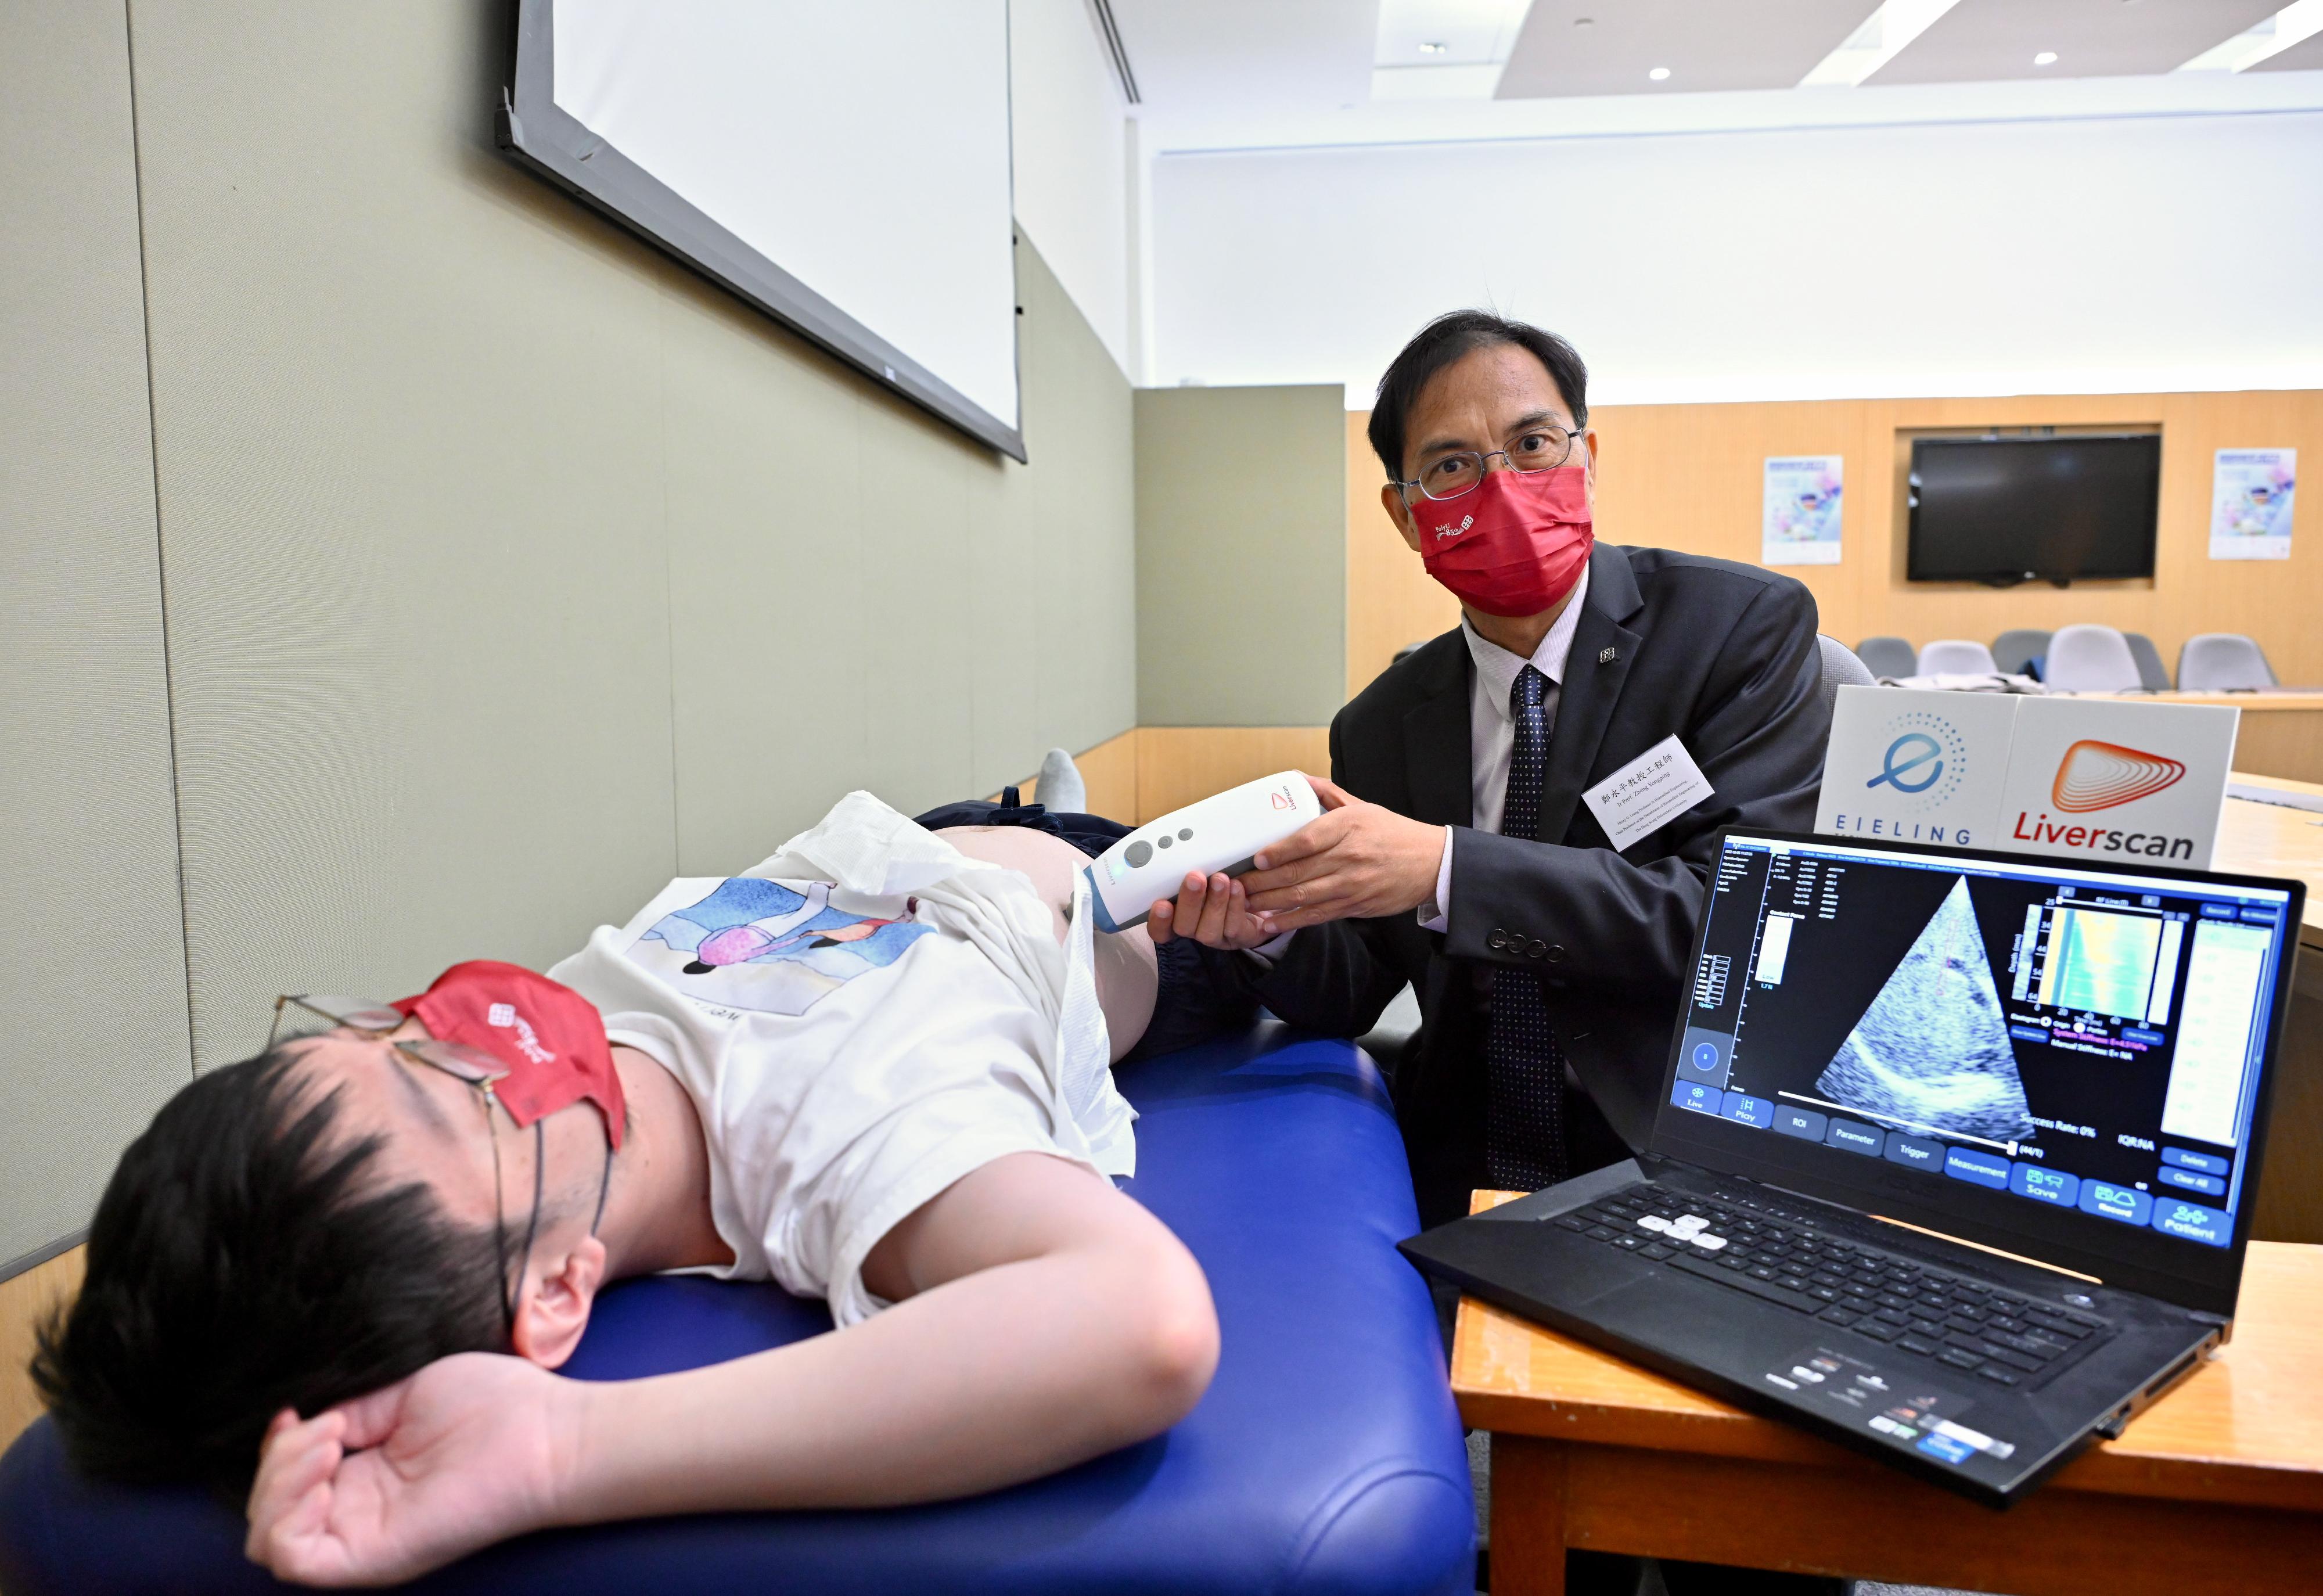 InnoCarnival 2022 will run from October 22 to 30. Picture shows the Hong Kong Polytechnic University's Liverscan, a palm-sized tool for detecting and staging liver fibrosis through a non-invasive ultrasound measurement of liver stiffness for patients' early diagnosis and treatment.